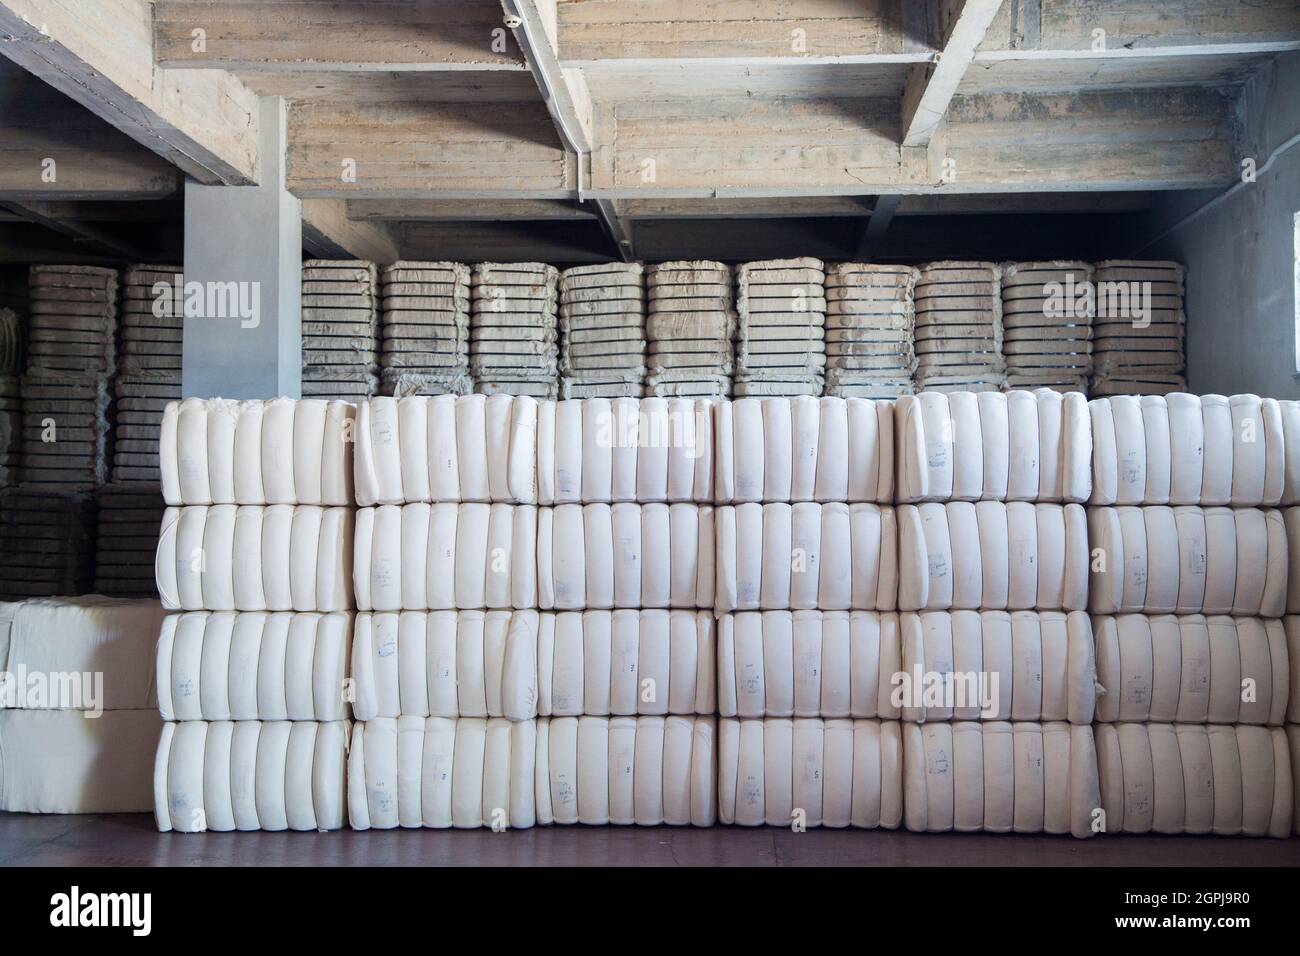 Raw cotton bales in textile factory. Stock Photo